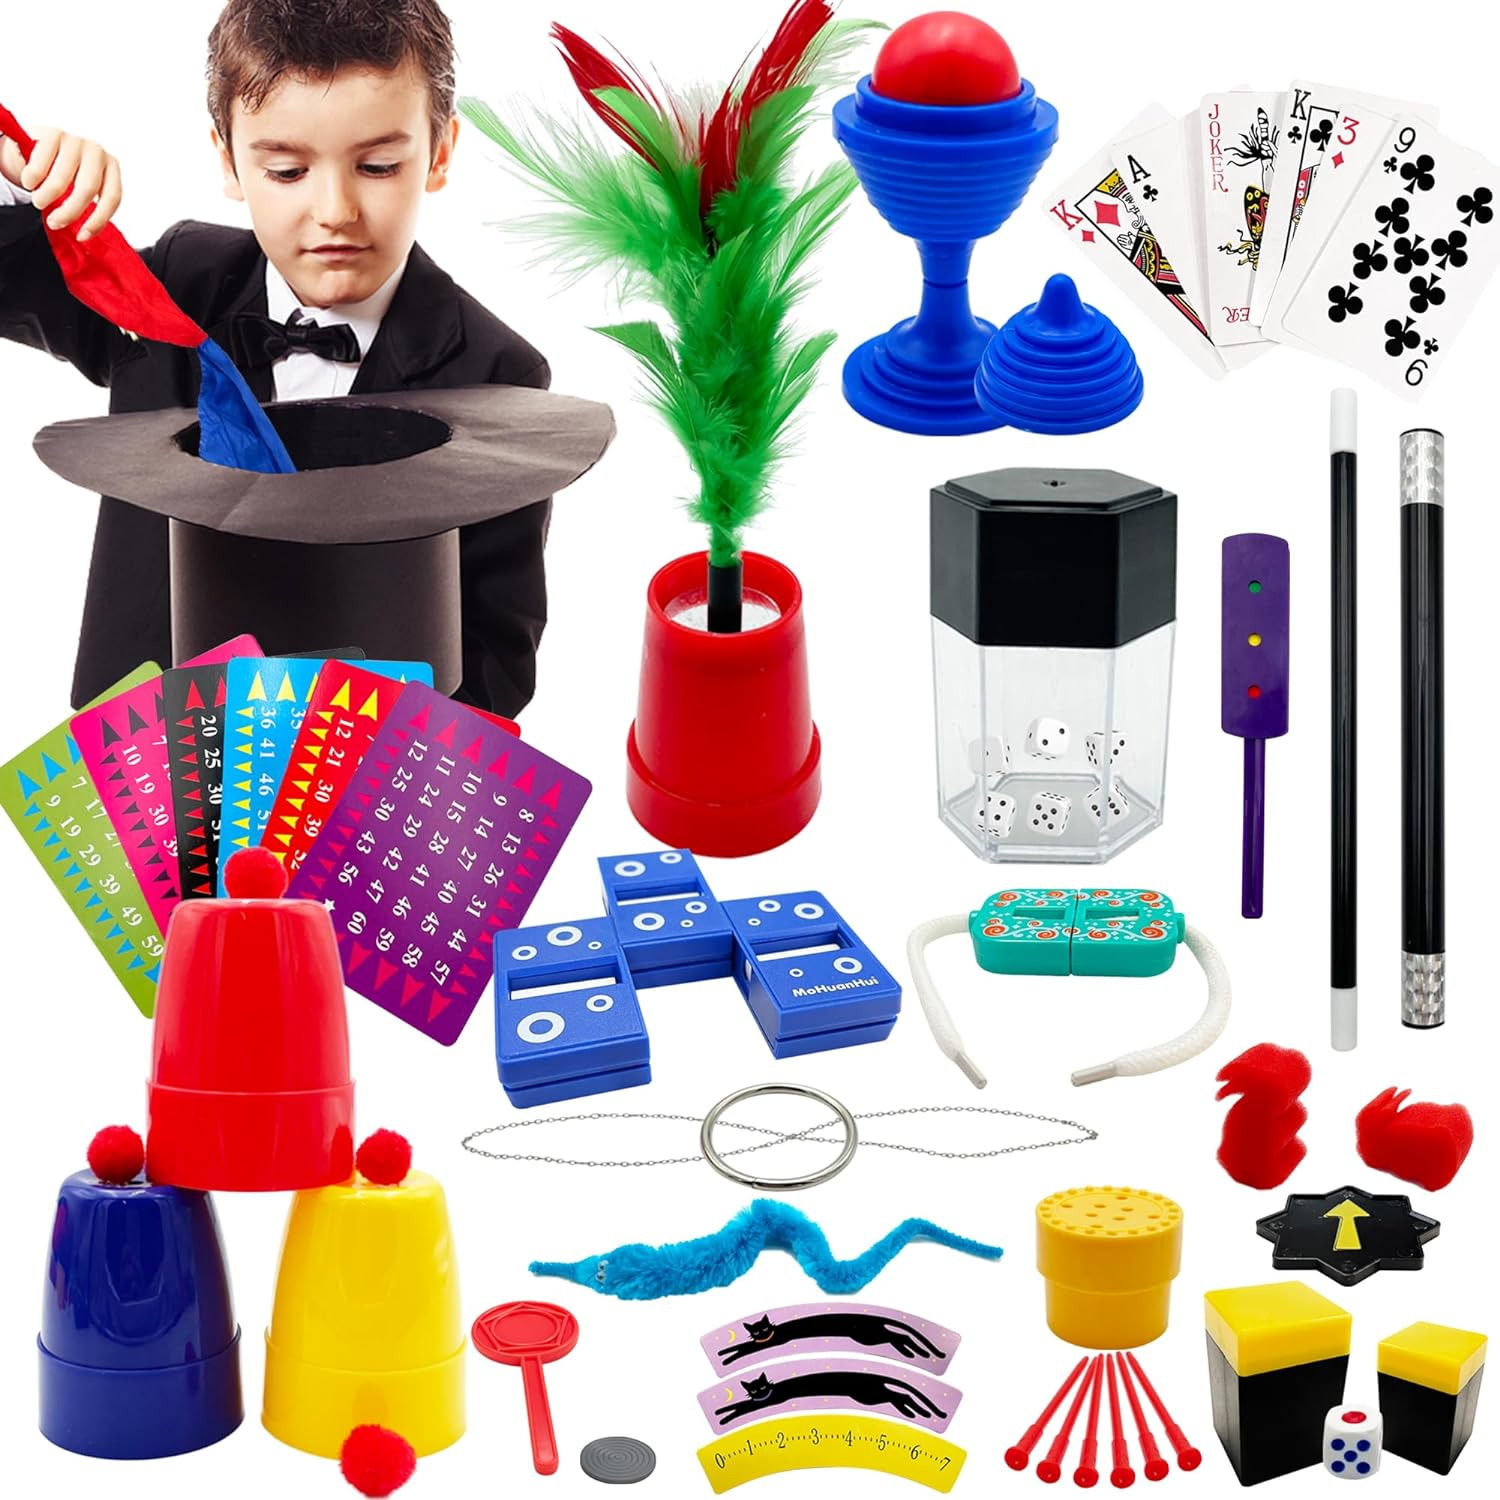 Magic Kits Magic Tricks Set for Boys and Girls to Perform for Birthday Gifts